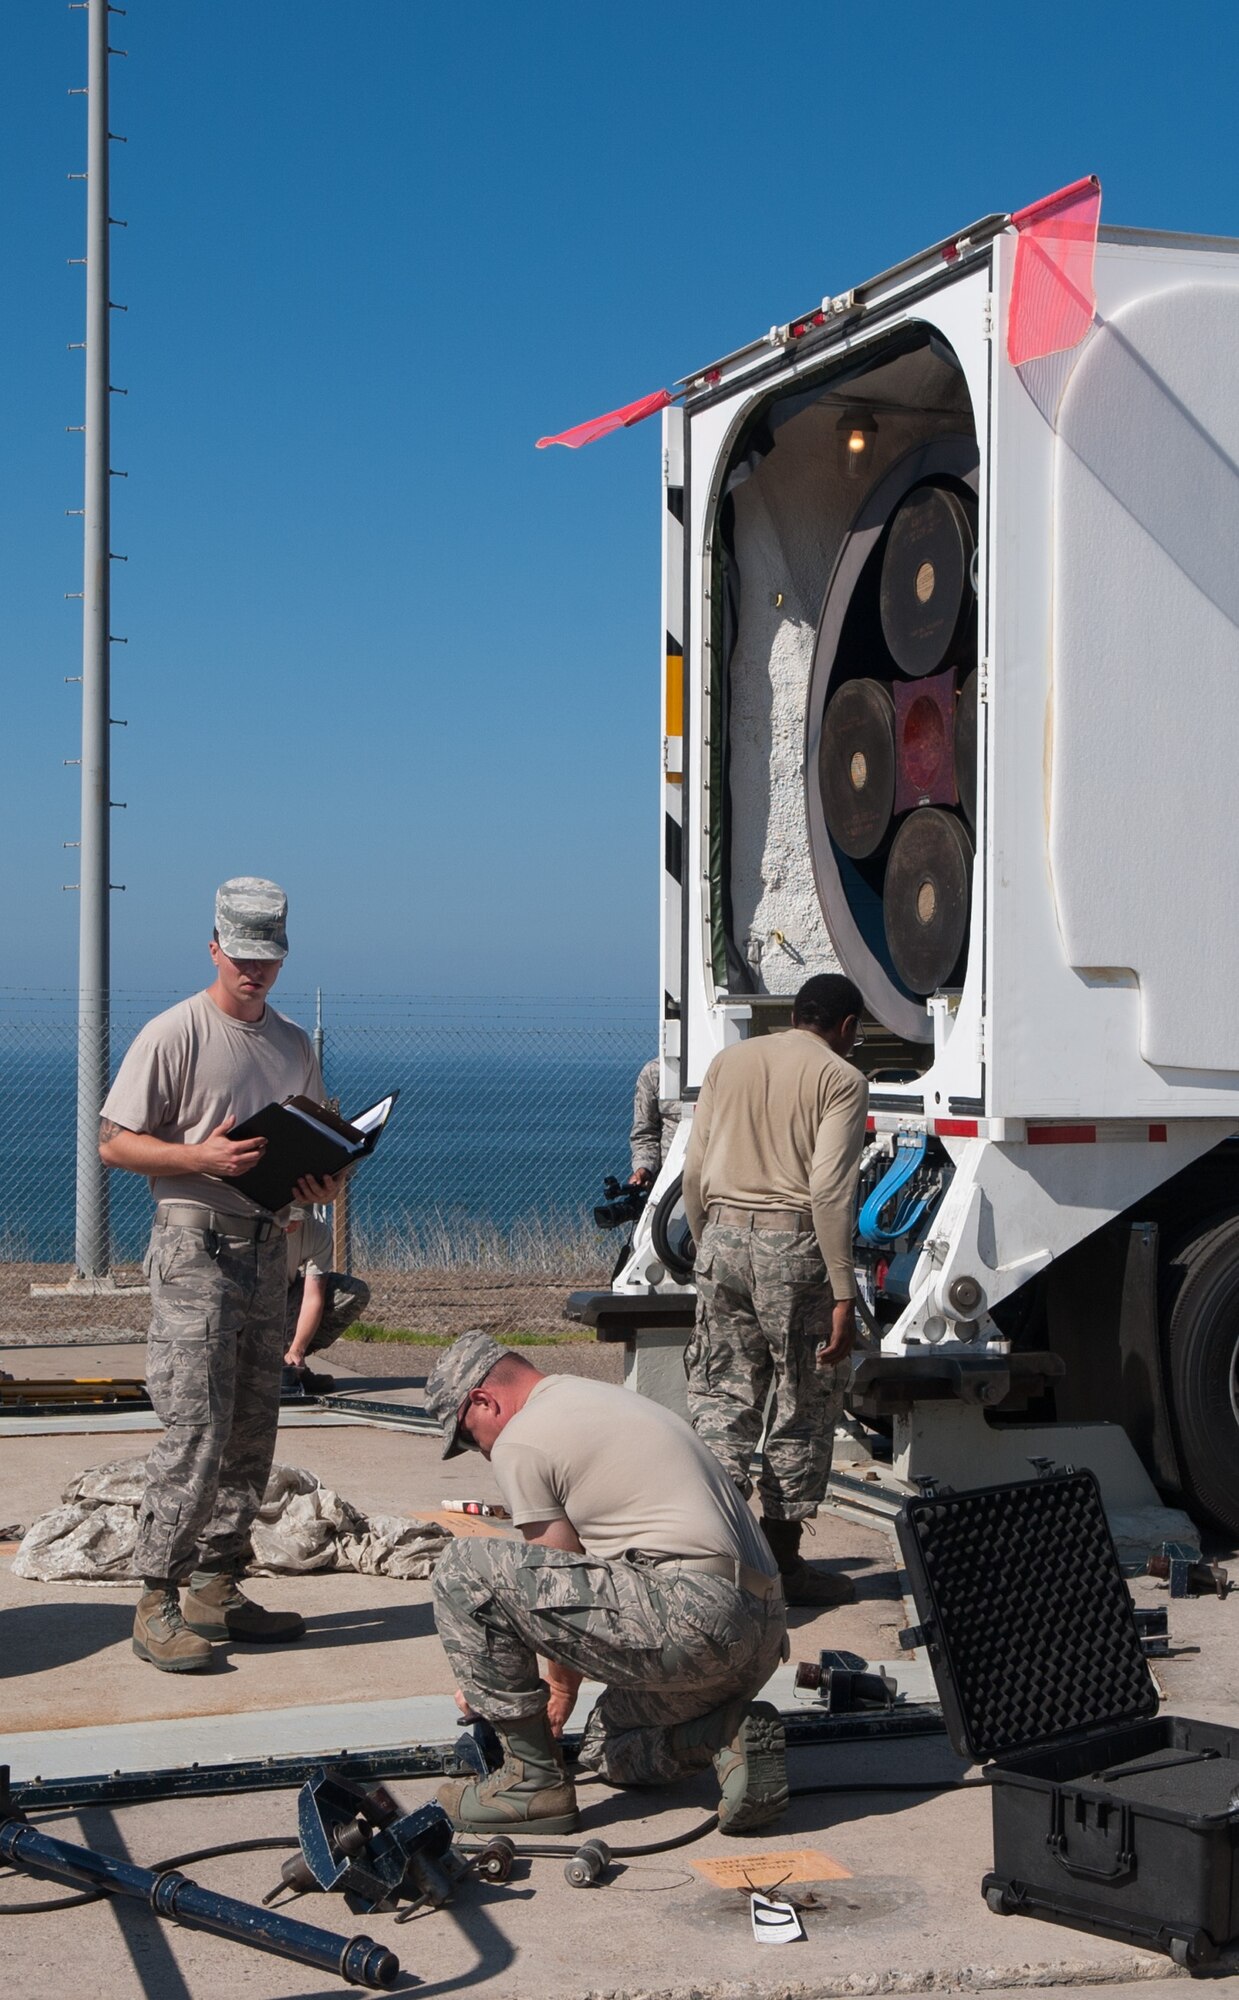 Missile maintenance Airmen prepare to unload a Minuteman III ICBM from a transport vehicle at the Vandenberg Air Force Base, Calif., Aug. 26, 2014. A joint team from the 576th Test Squadron at Vandenberg and the 91st Missile Squadron at Minot AFB, N.D., launched the missile Sept. 23, showcasing the capabilities of the Air Force’s ground-based leg of the nation’s nuclear triad. (U.S. Air Force courtesy photo)